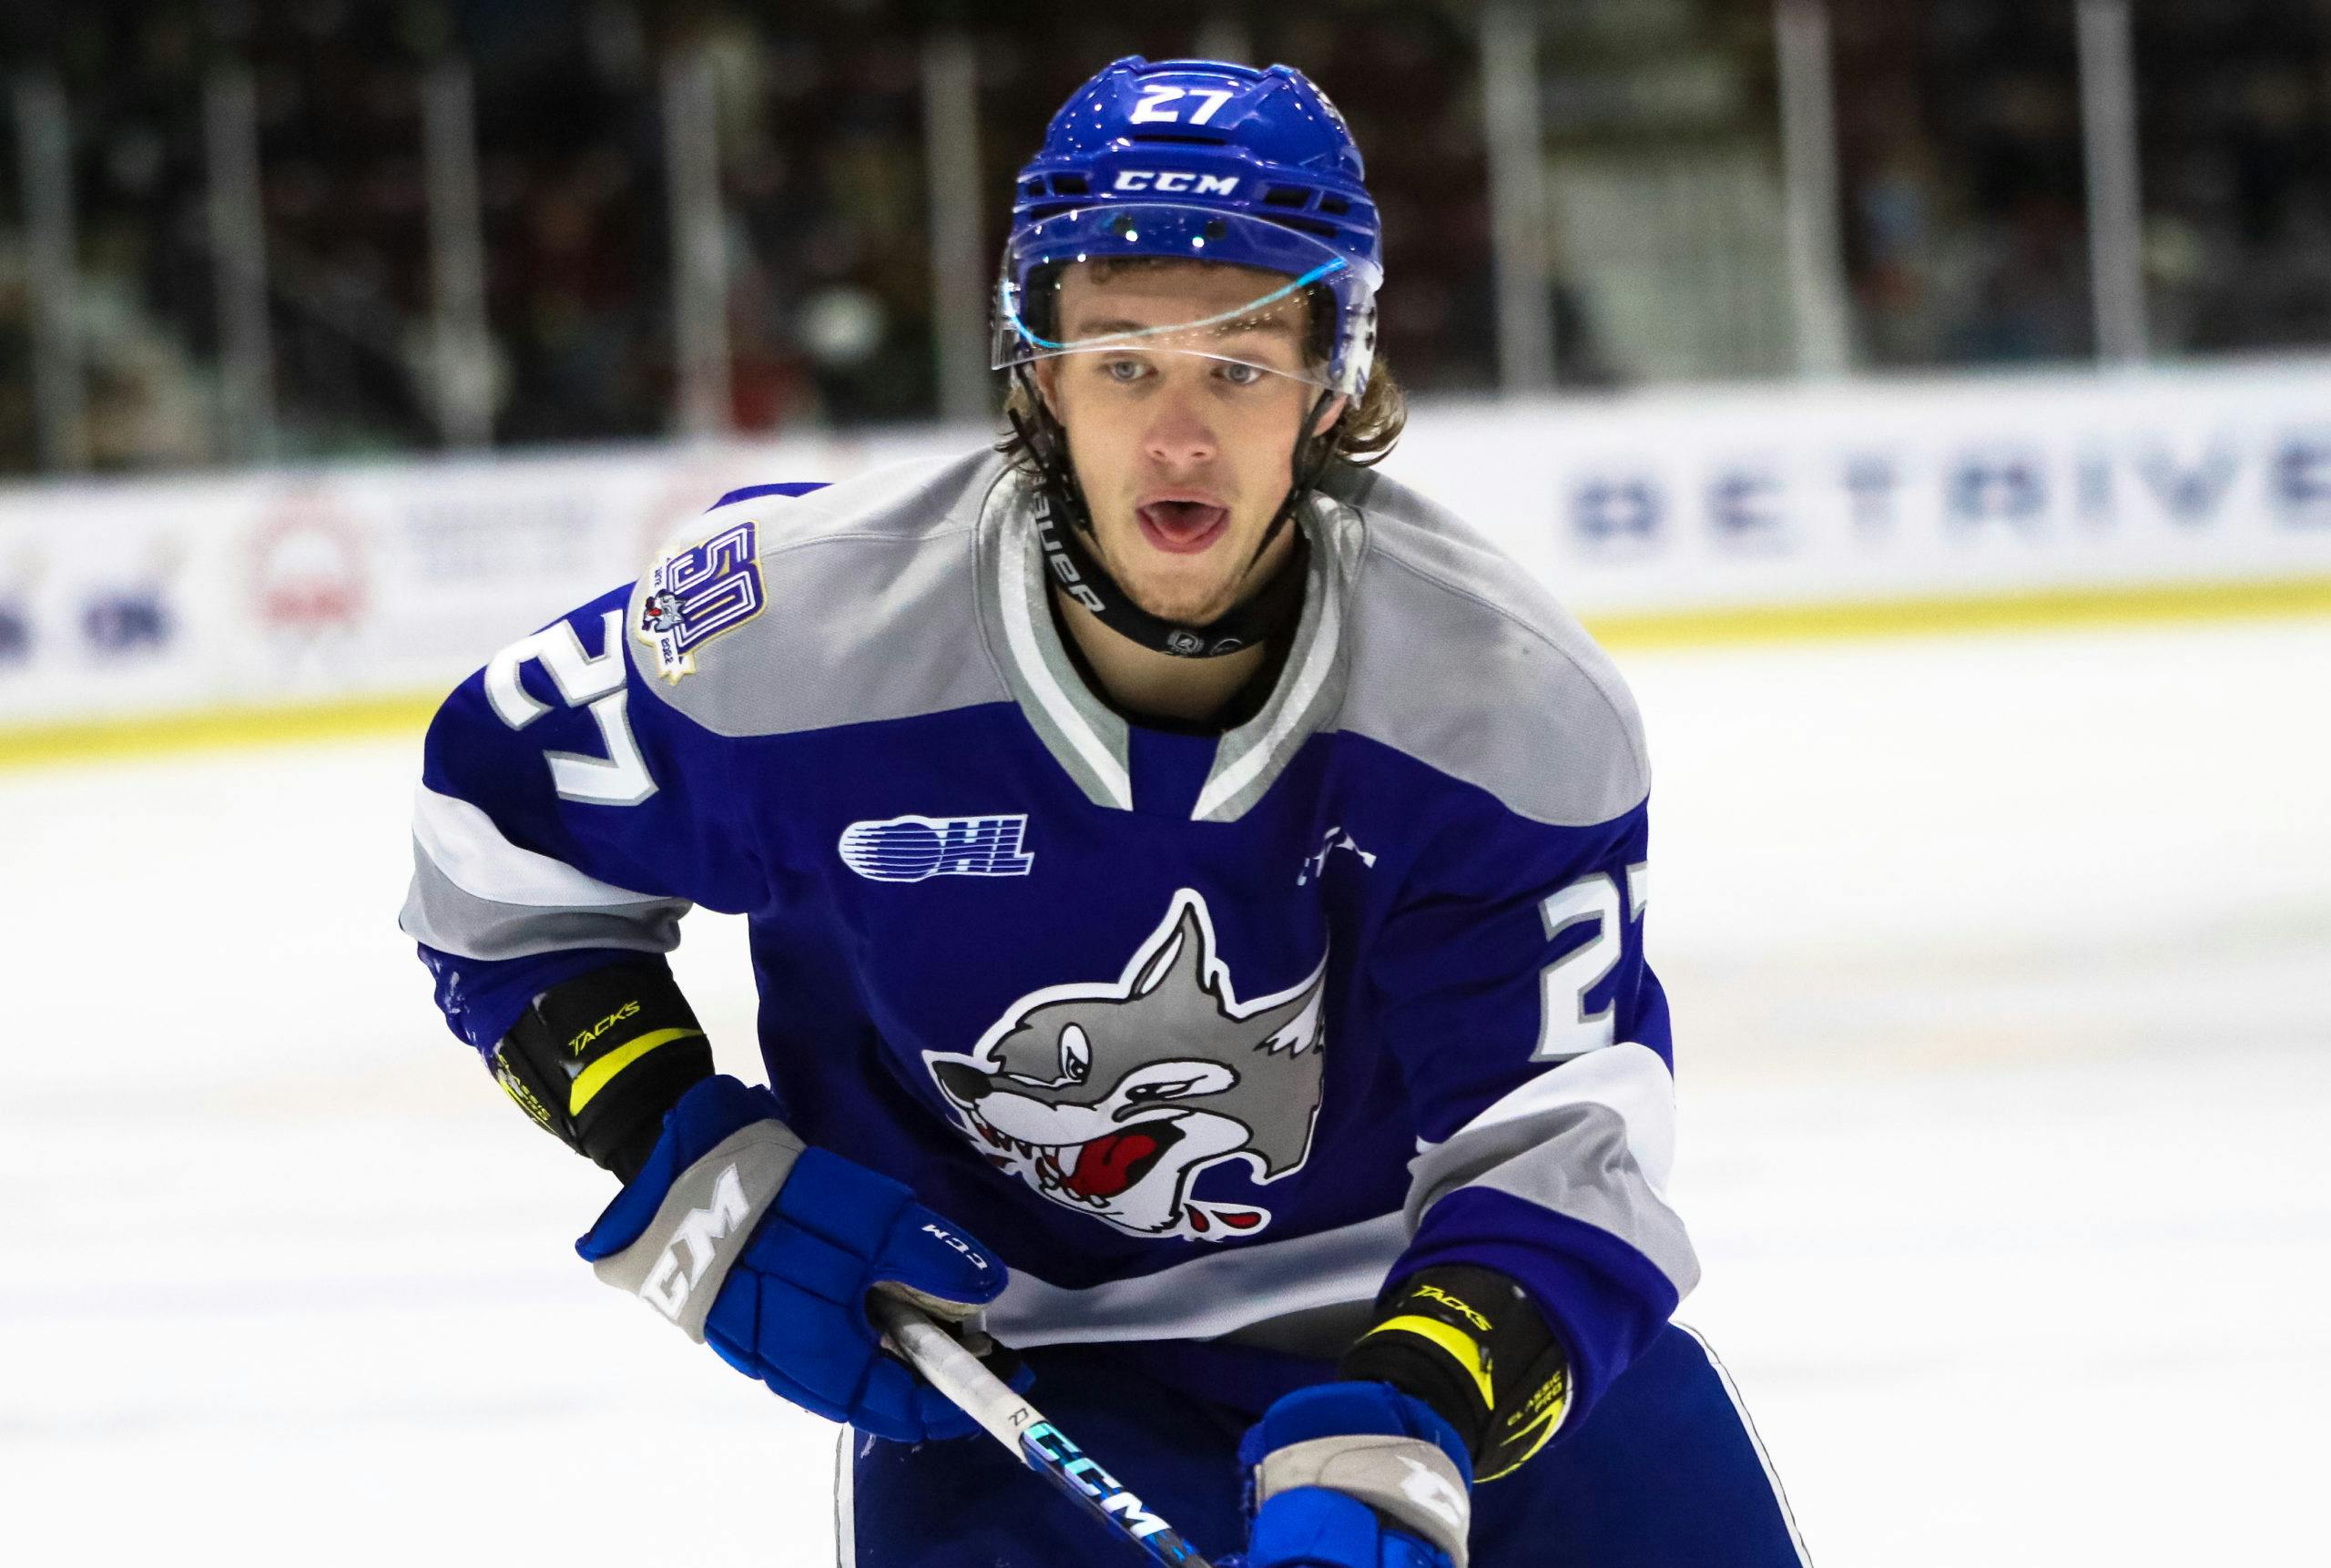 Easton Cowan went from Maple Leafs fan to first-round pick